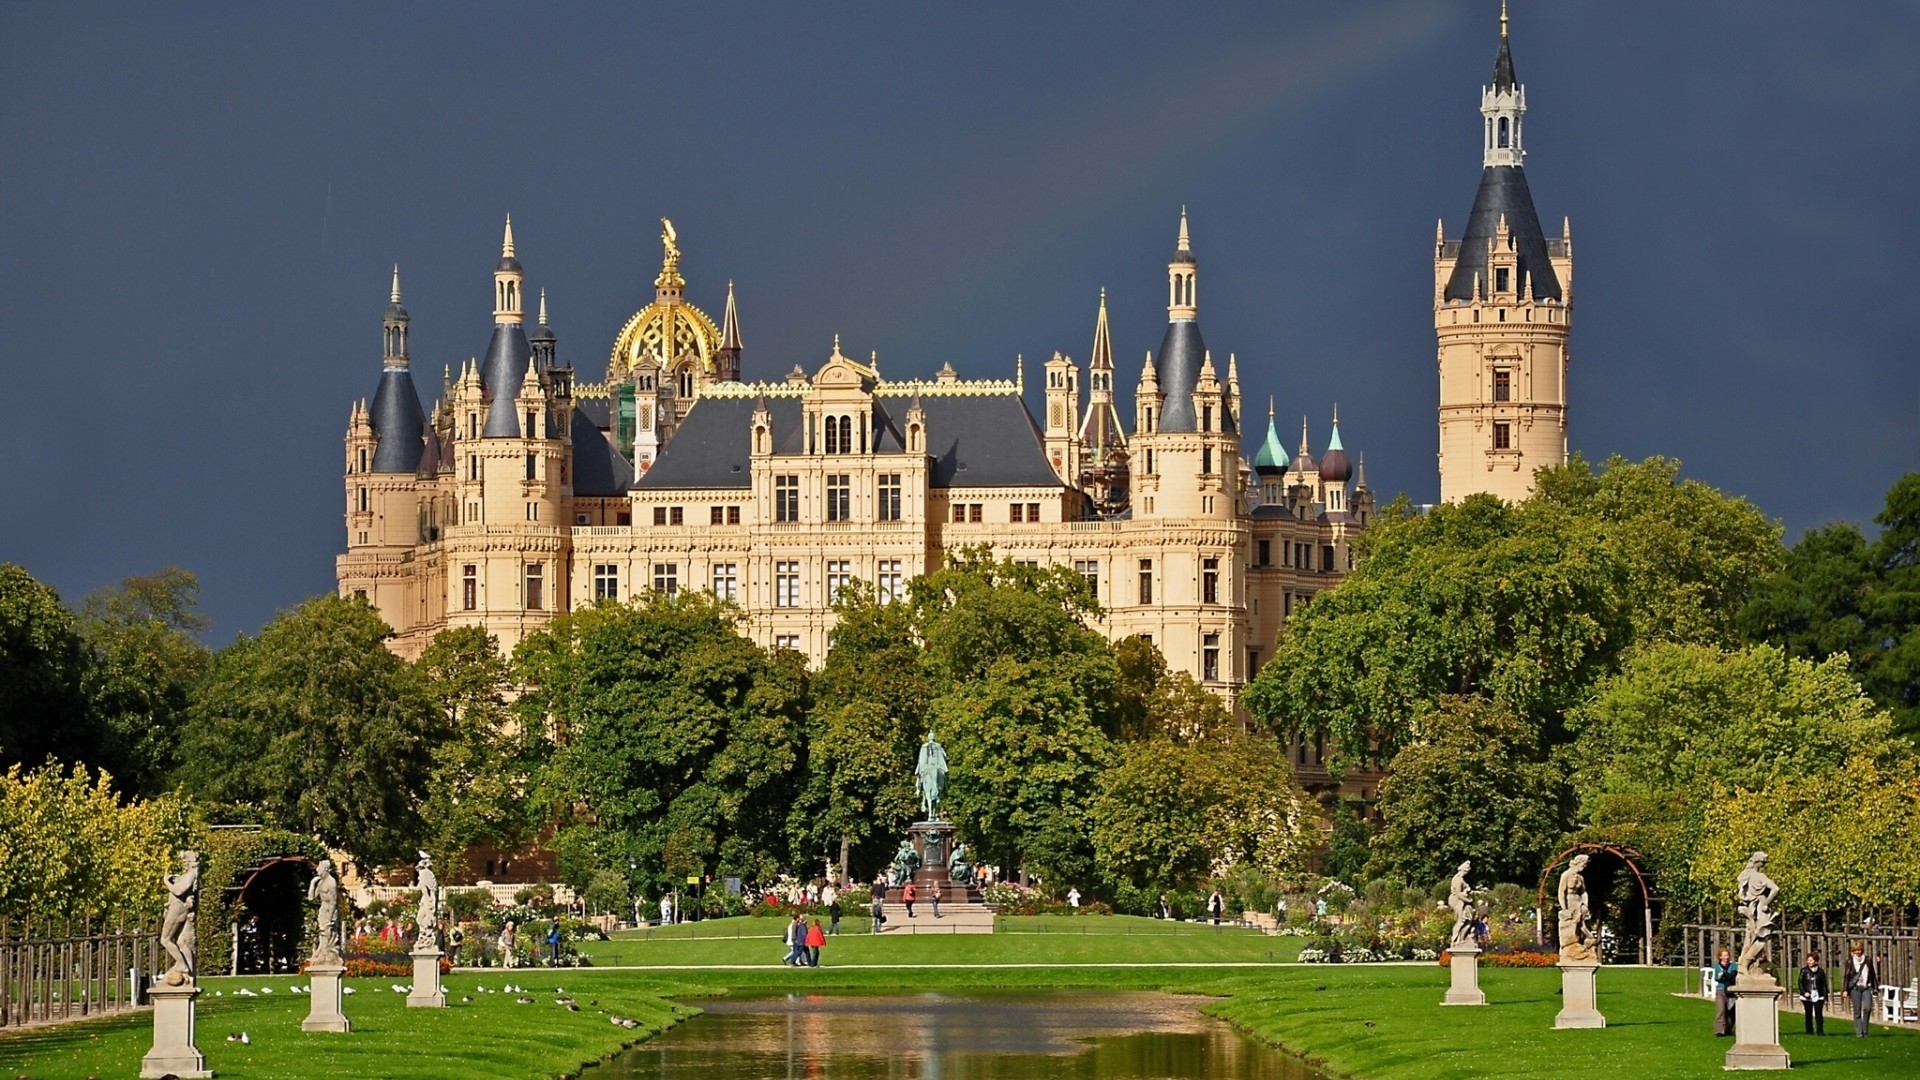 Schwerin Castle Germany for 1920 x 1080 HDTV 1080p resolution